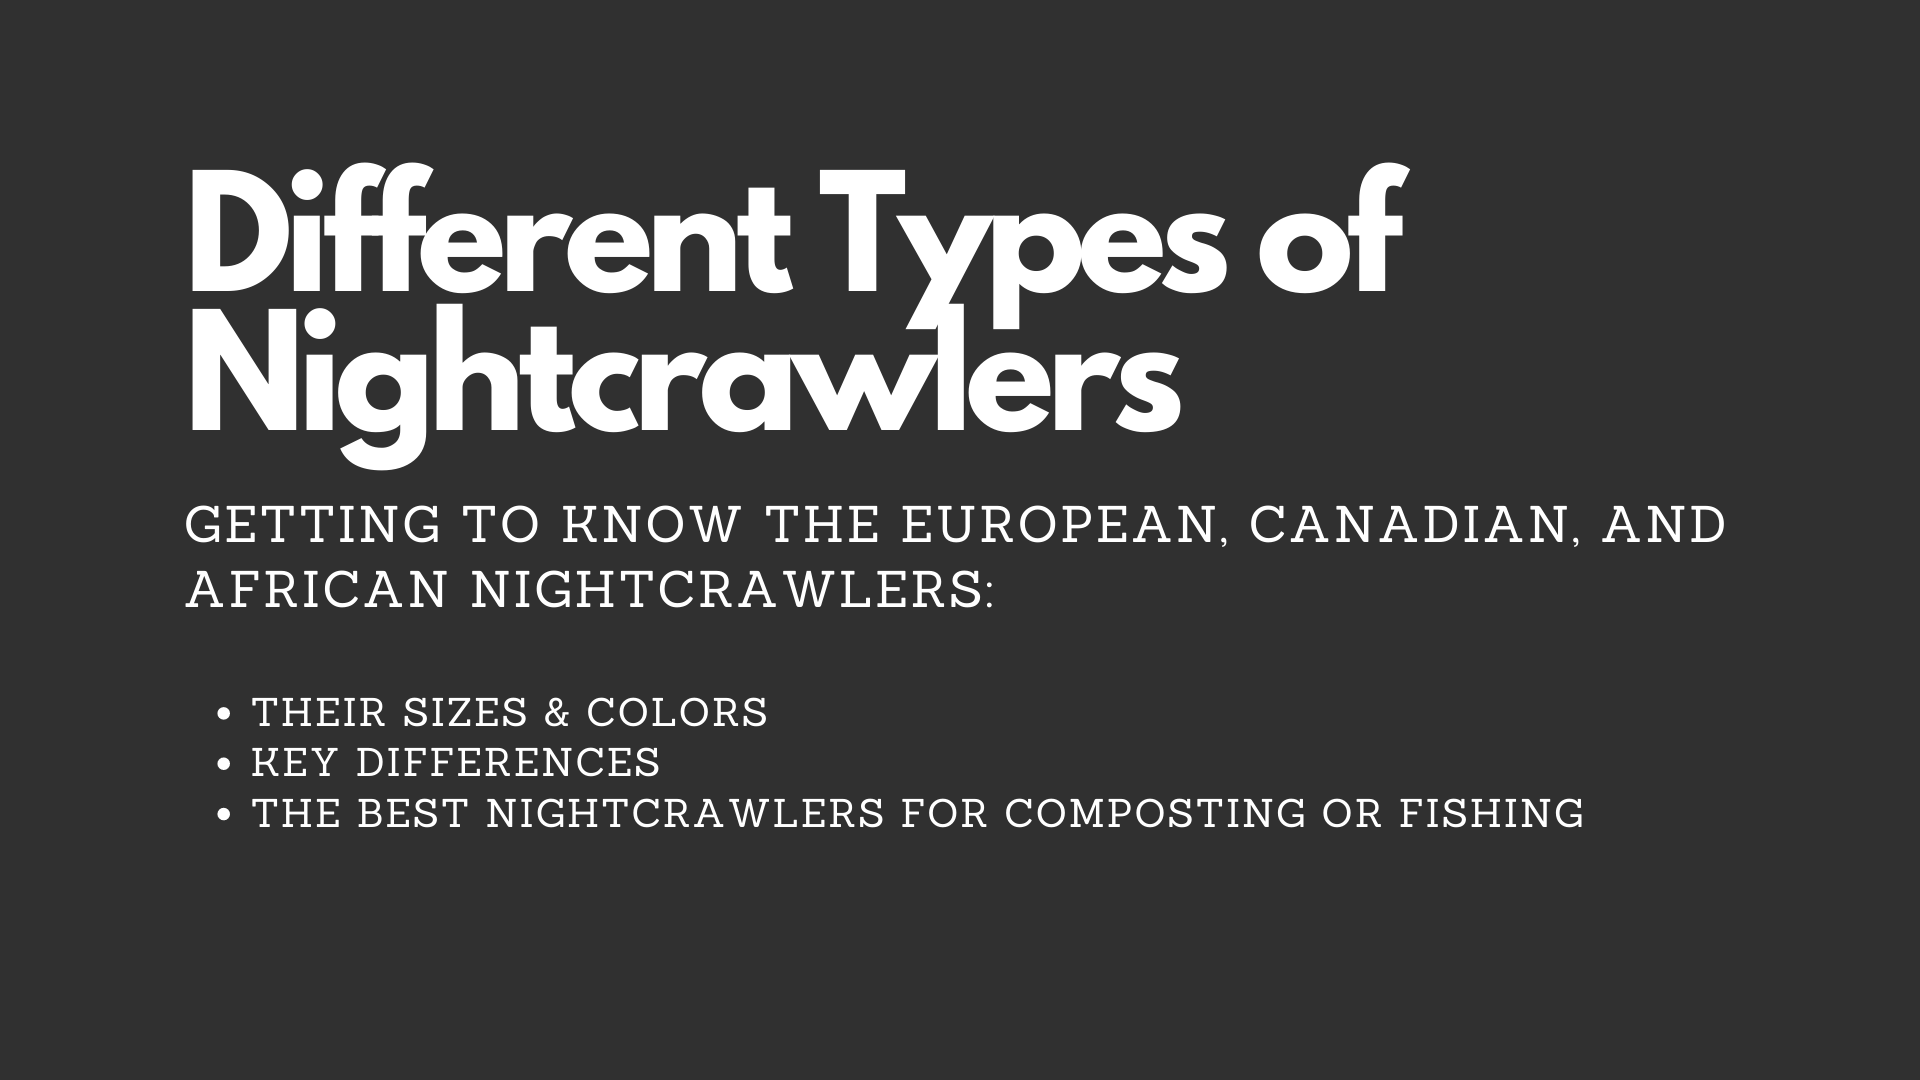 Canadian, African, and European Nightcrawlers: Get to Know the